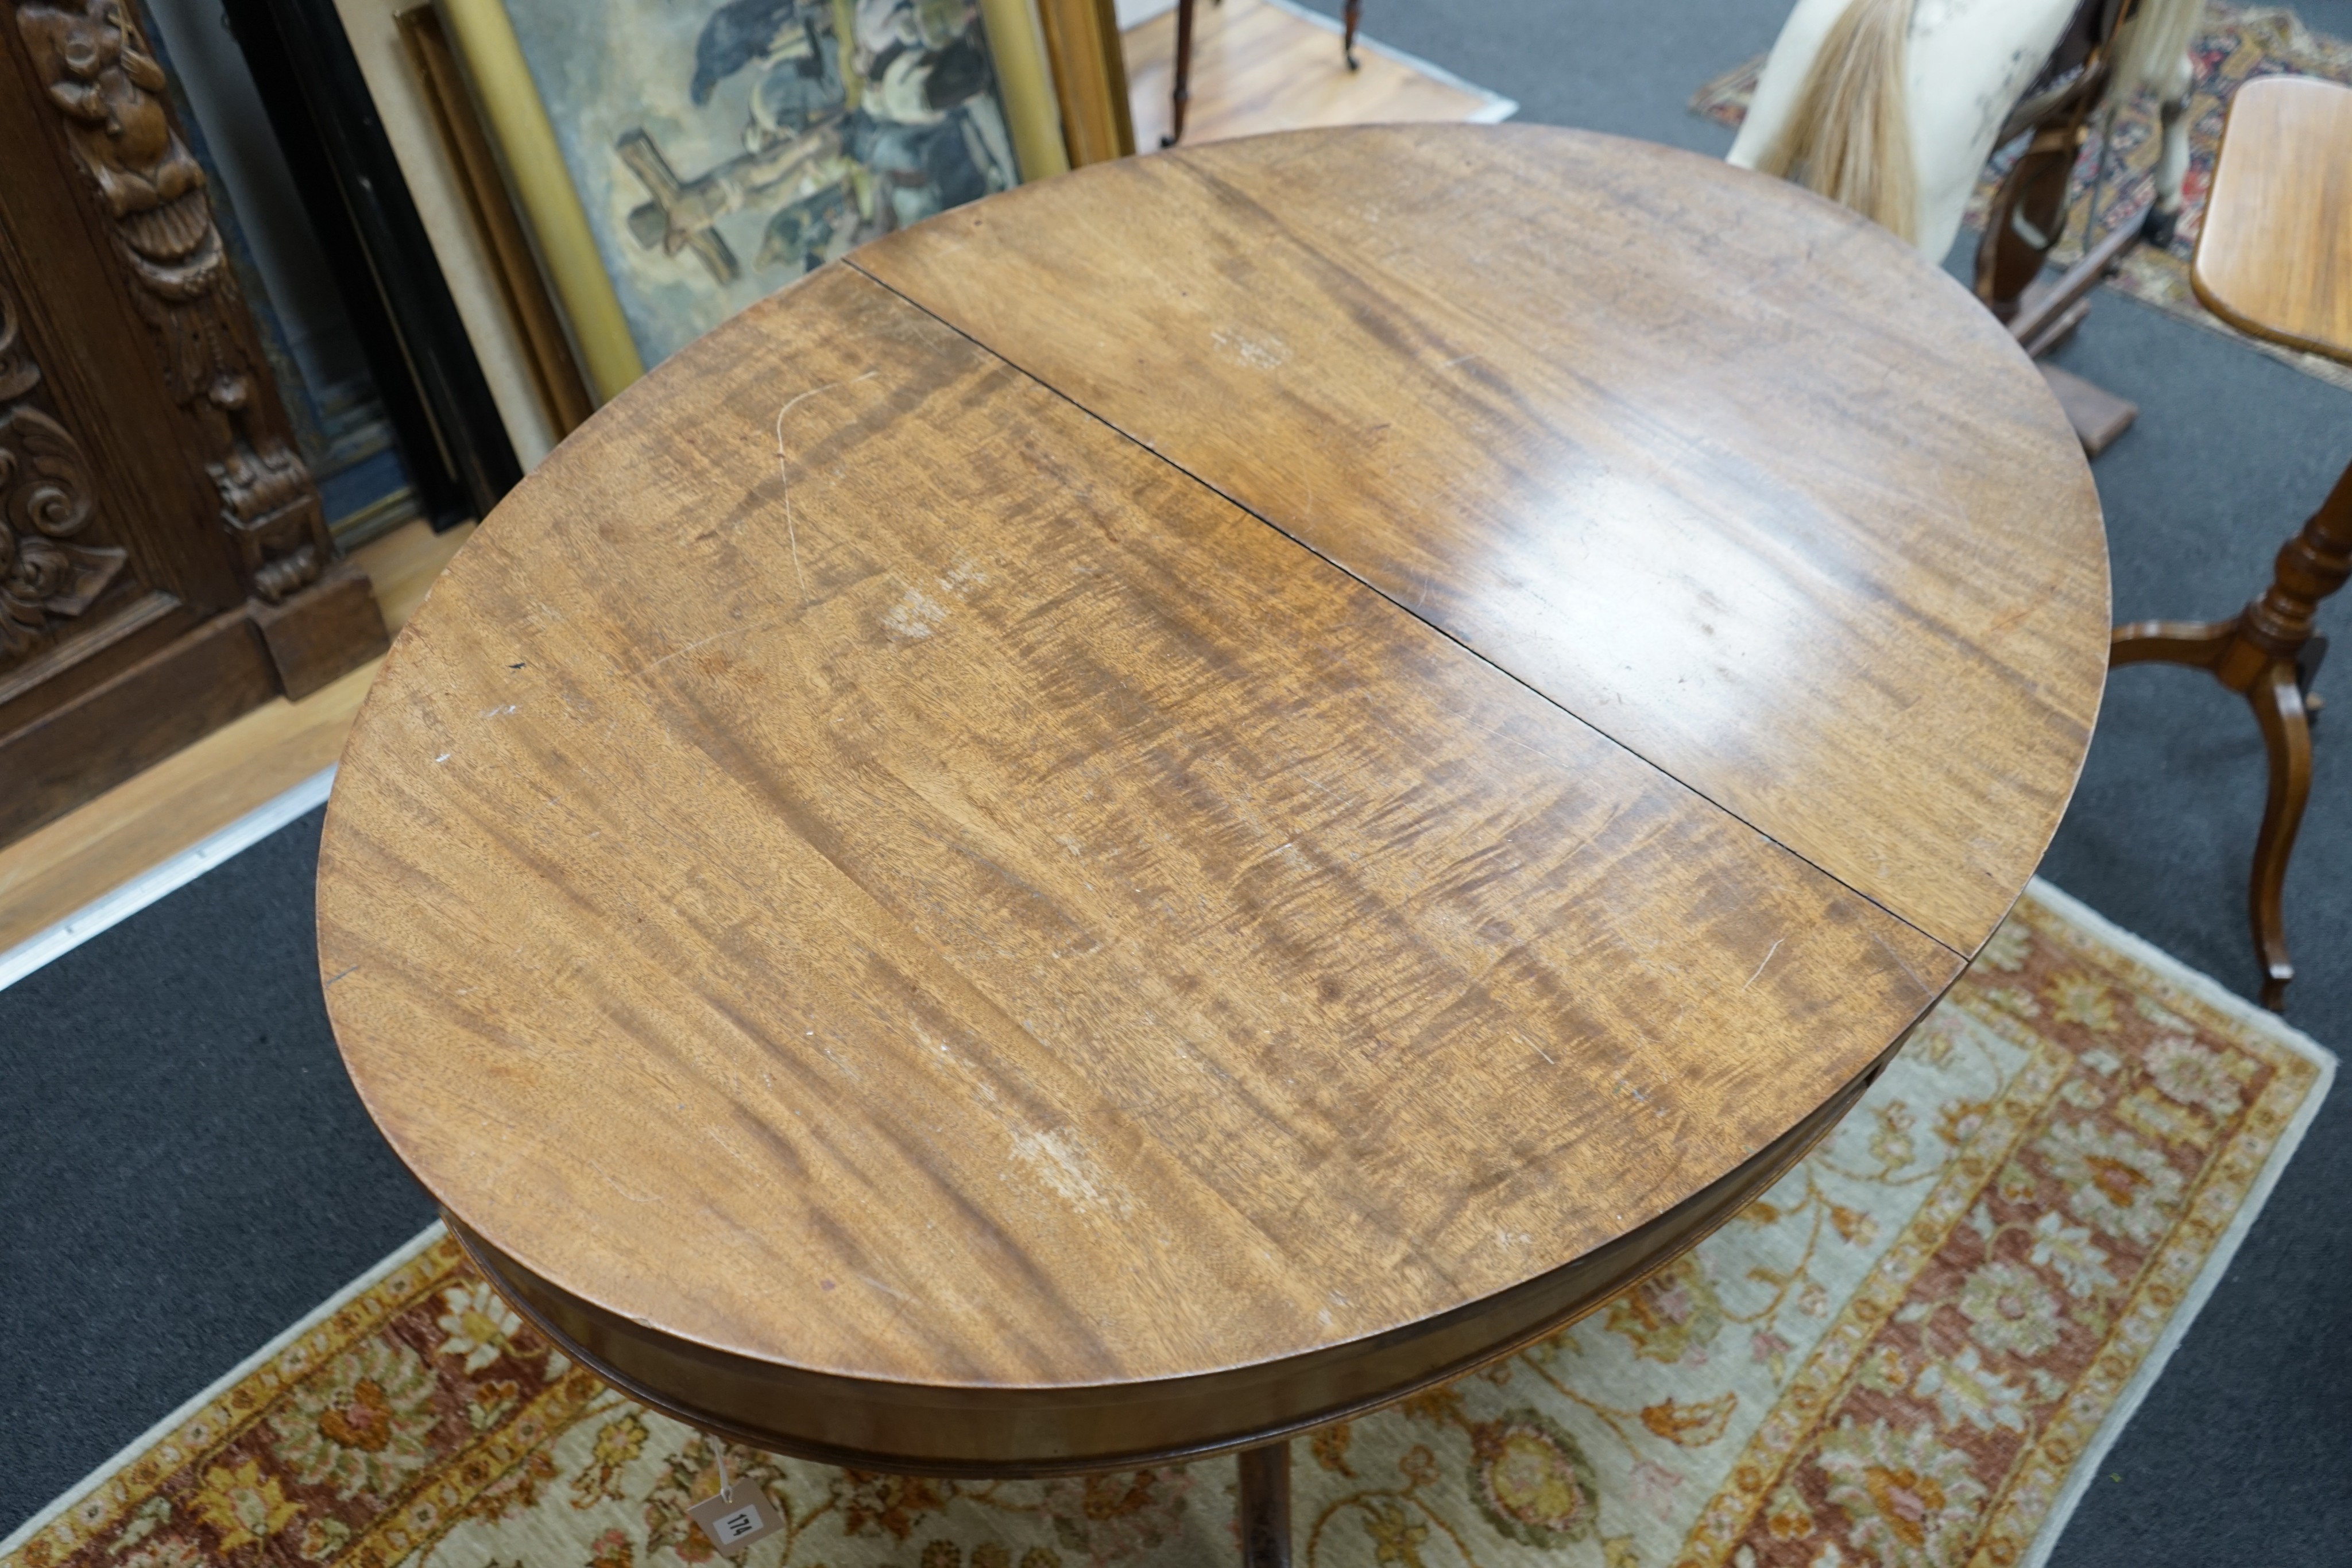 A small George III style oval mahogany extending dining table, (no leaves) width 126cm, depth 91cm, height 77cm